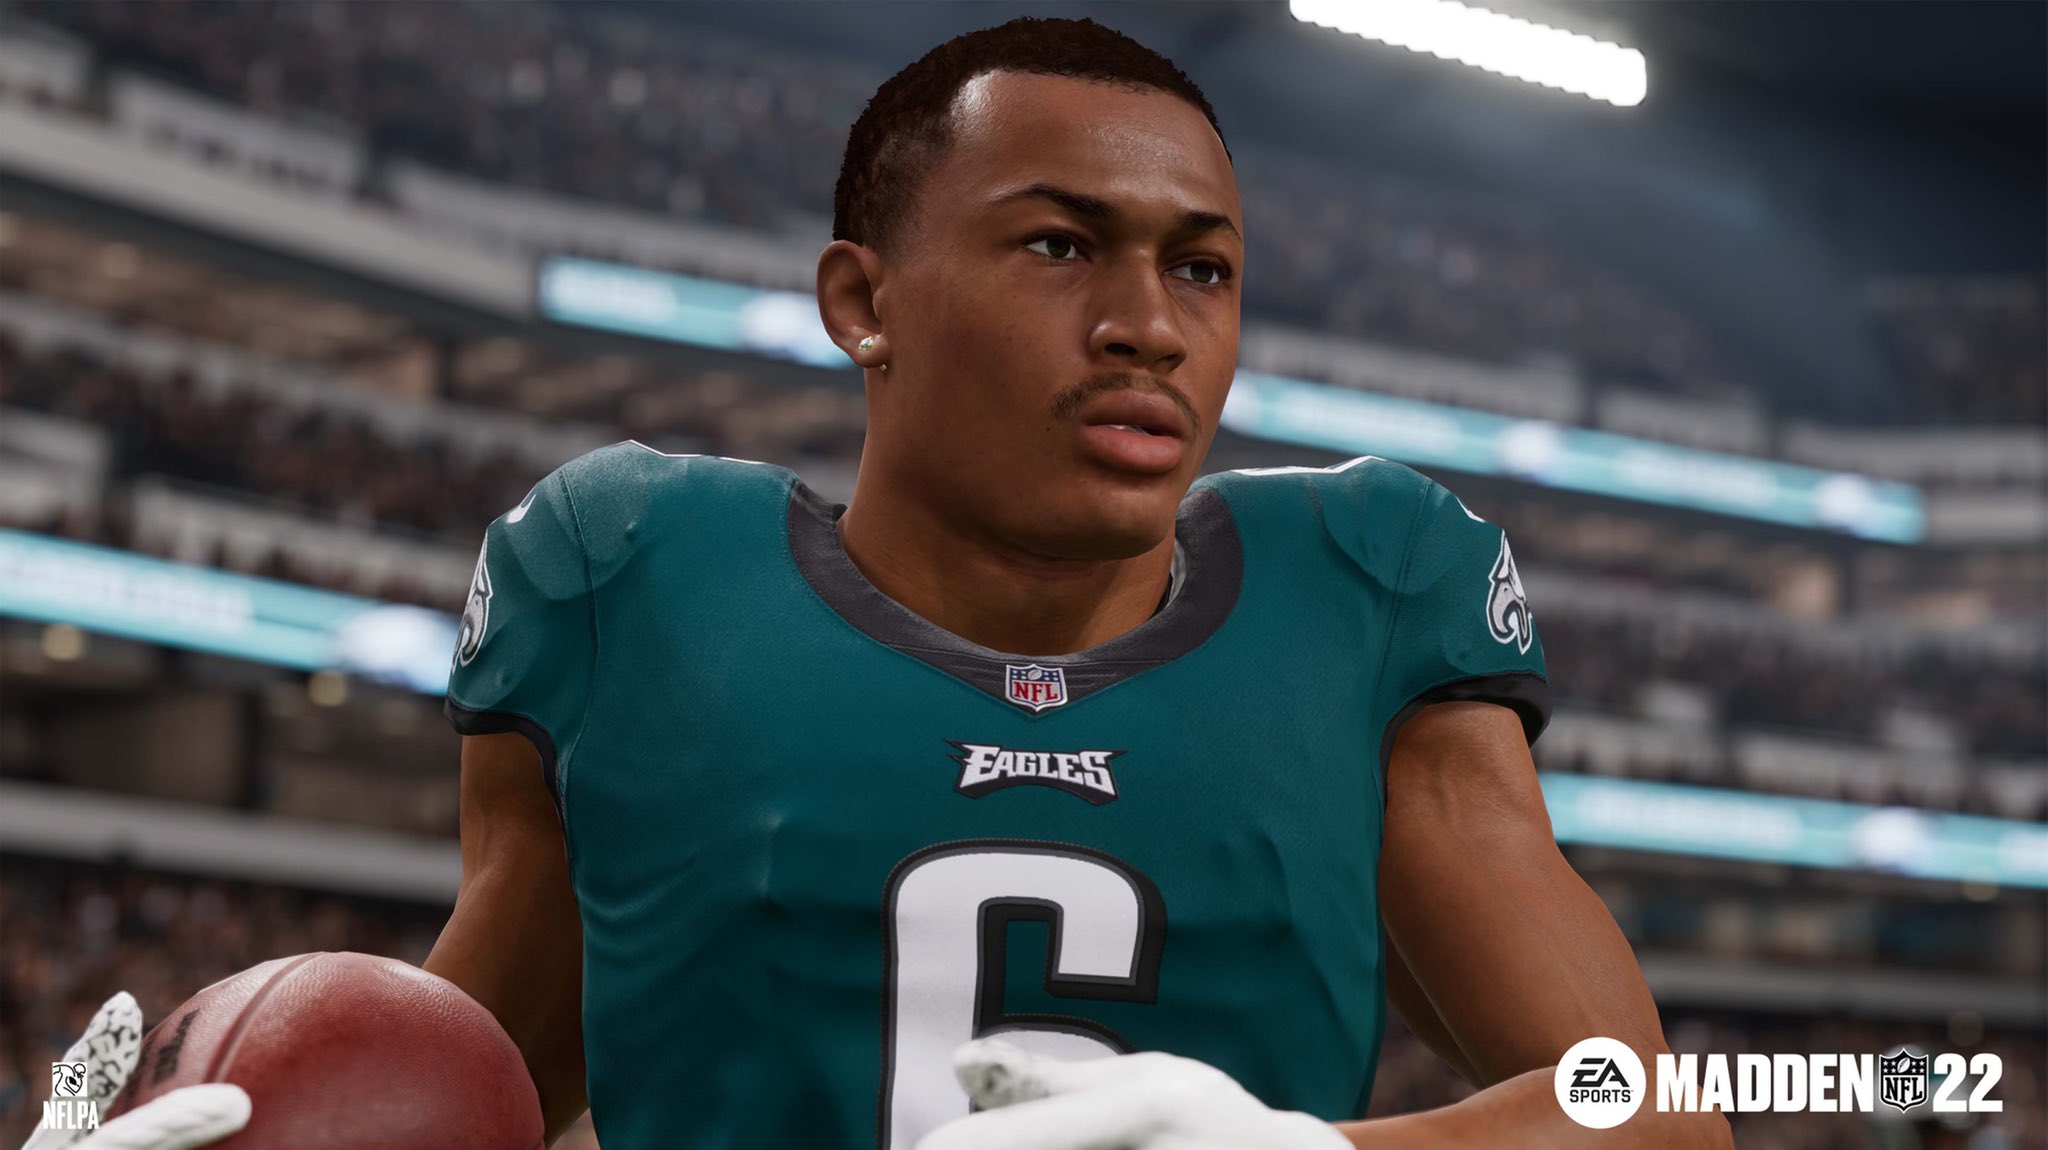 Madden NFL 22 Scouting Update Arrives with Gameplay Tuning & More